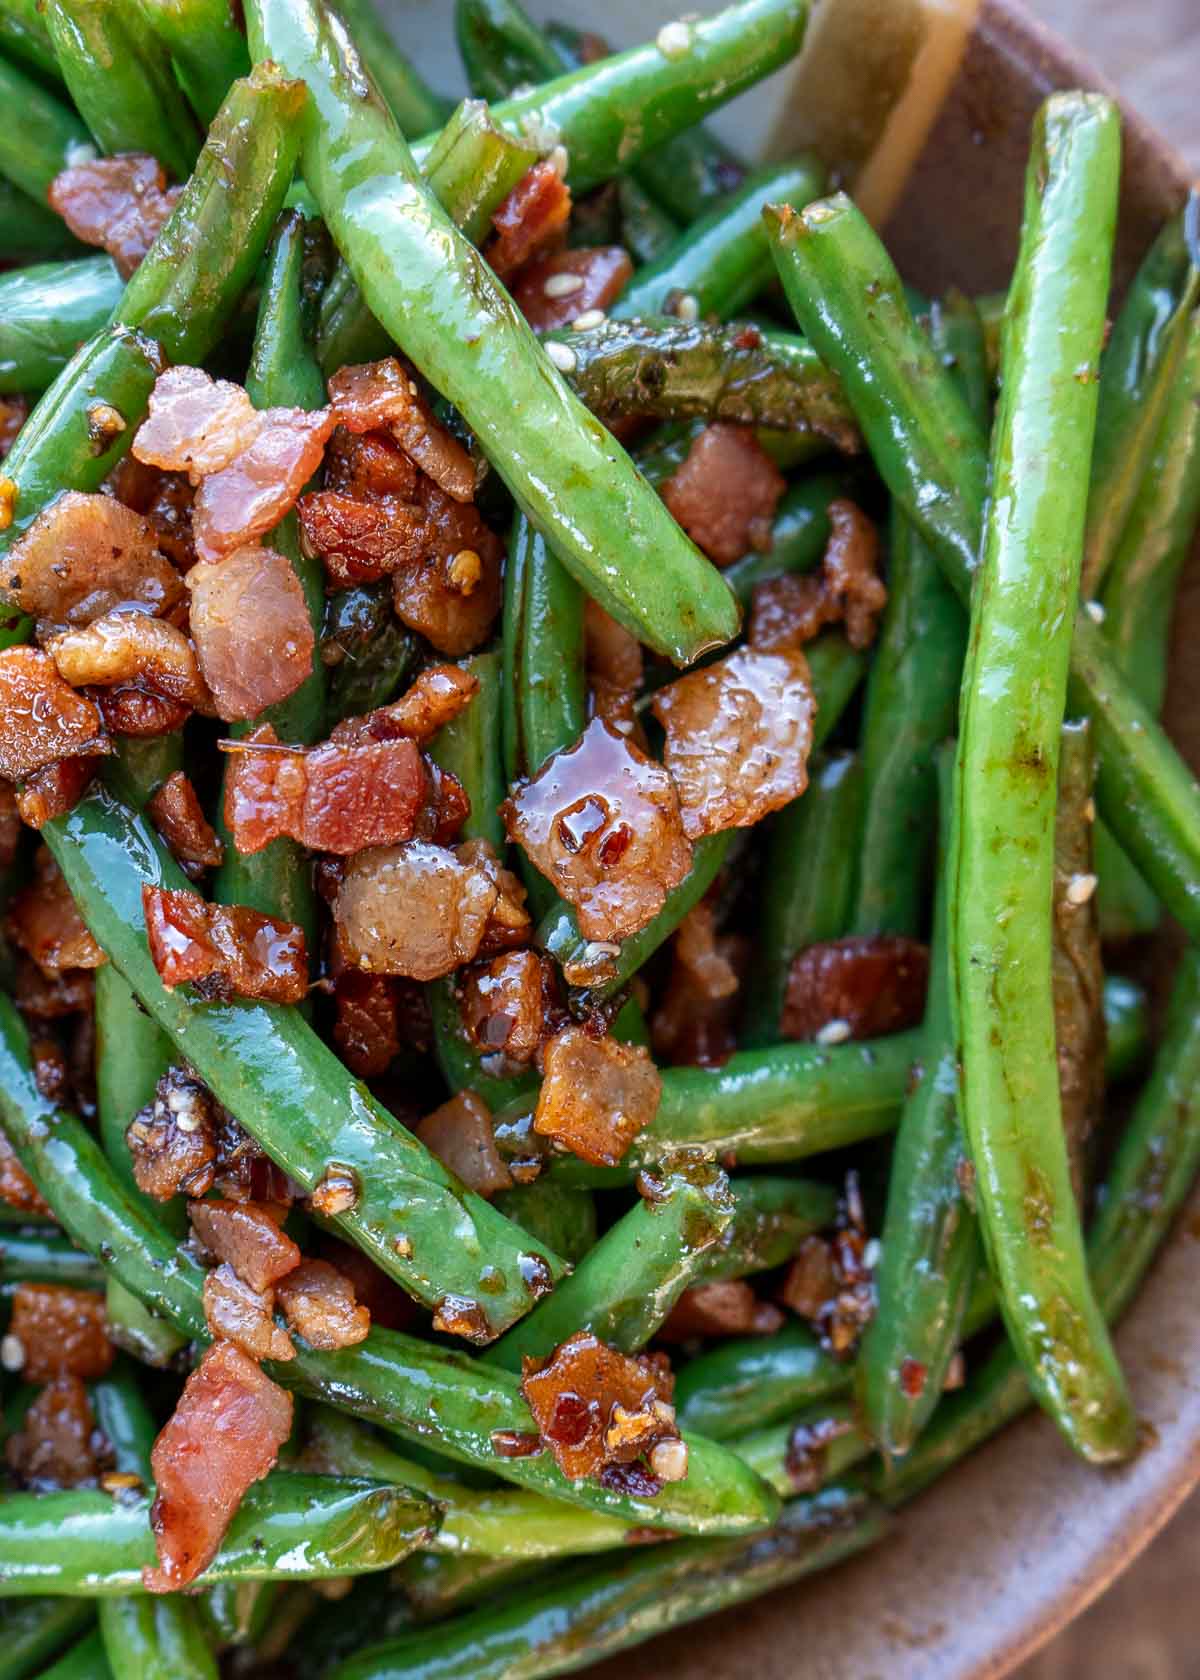 keto green beans and bacon in a bowl, tossed in a sweet and spicy sauce